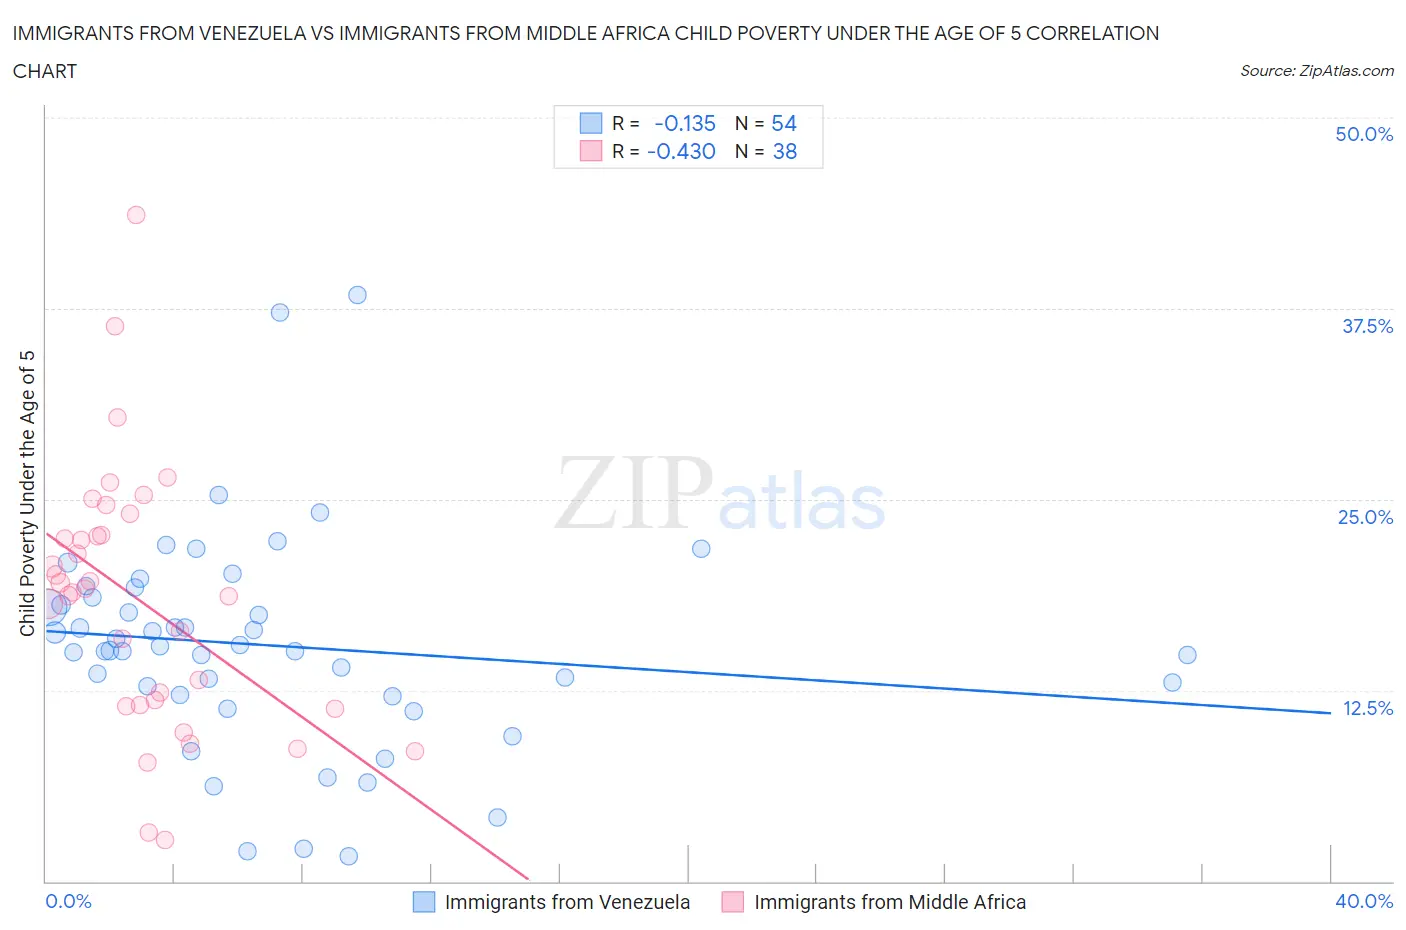 Immigrants from Venezuela vs Immigrants from Middle Africa Child Poverty Under the Age of 5